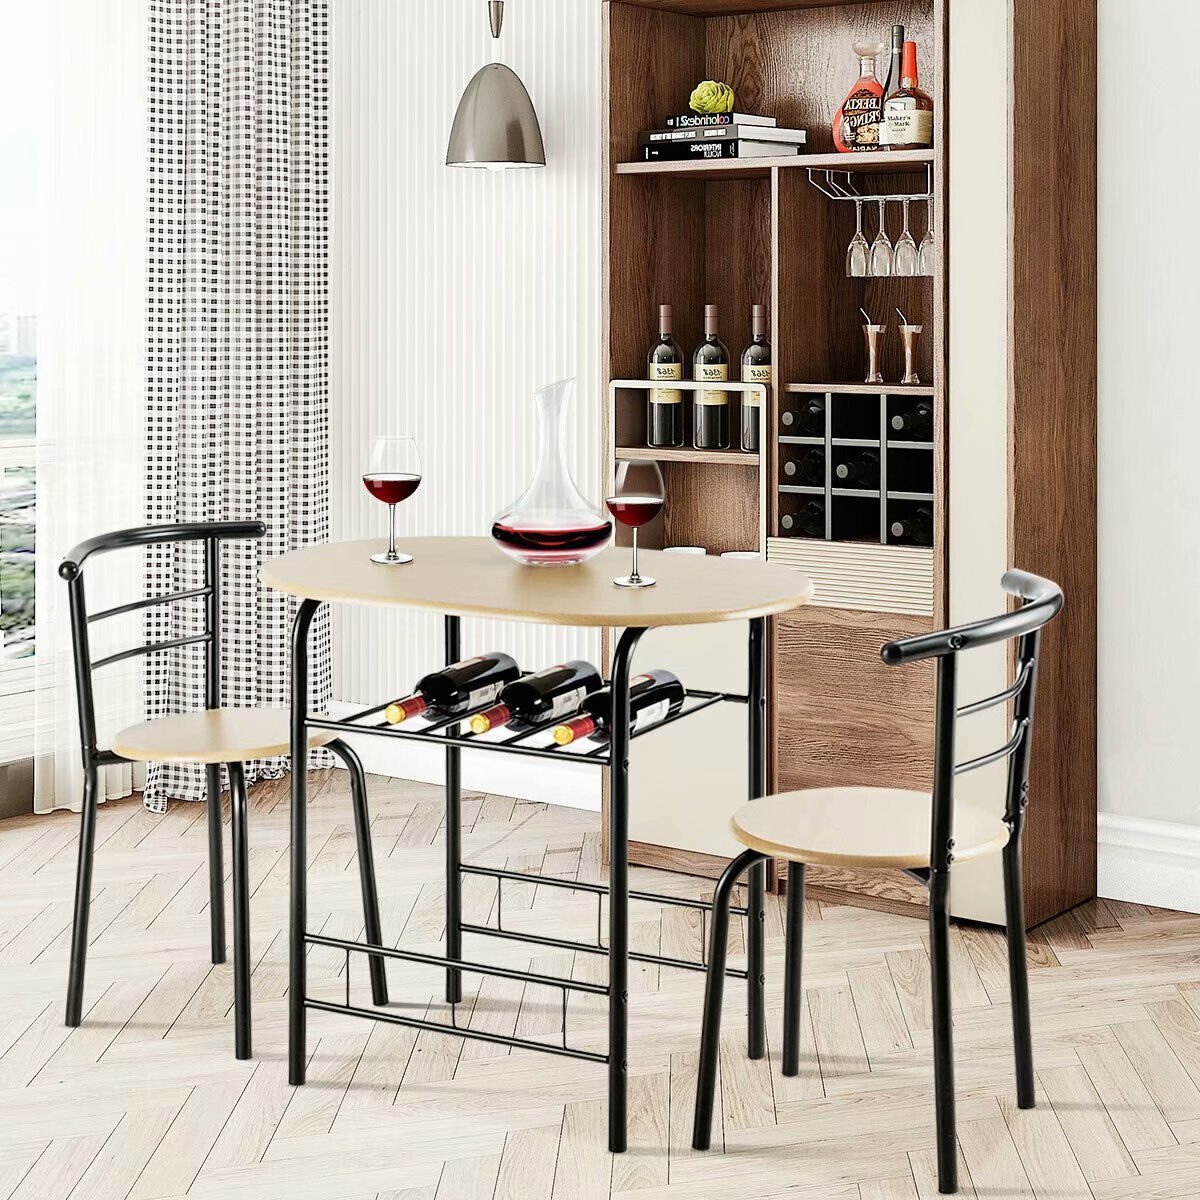 3 Pcs Dining Set 2 Chairs And Table Compact Bistro Pub Breakfast Home Kitchen